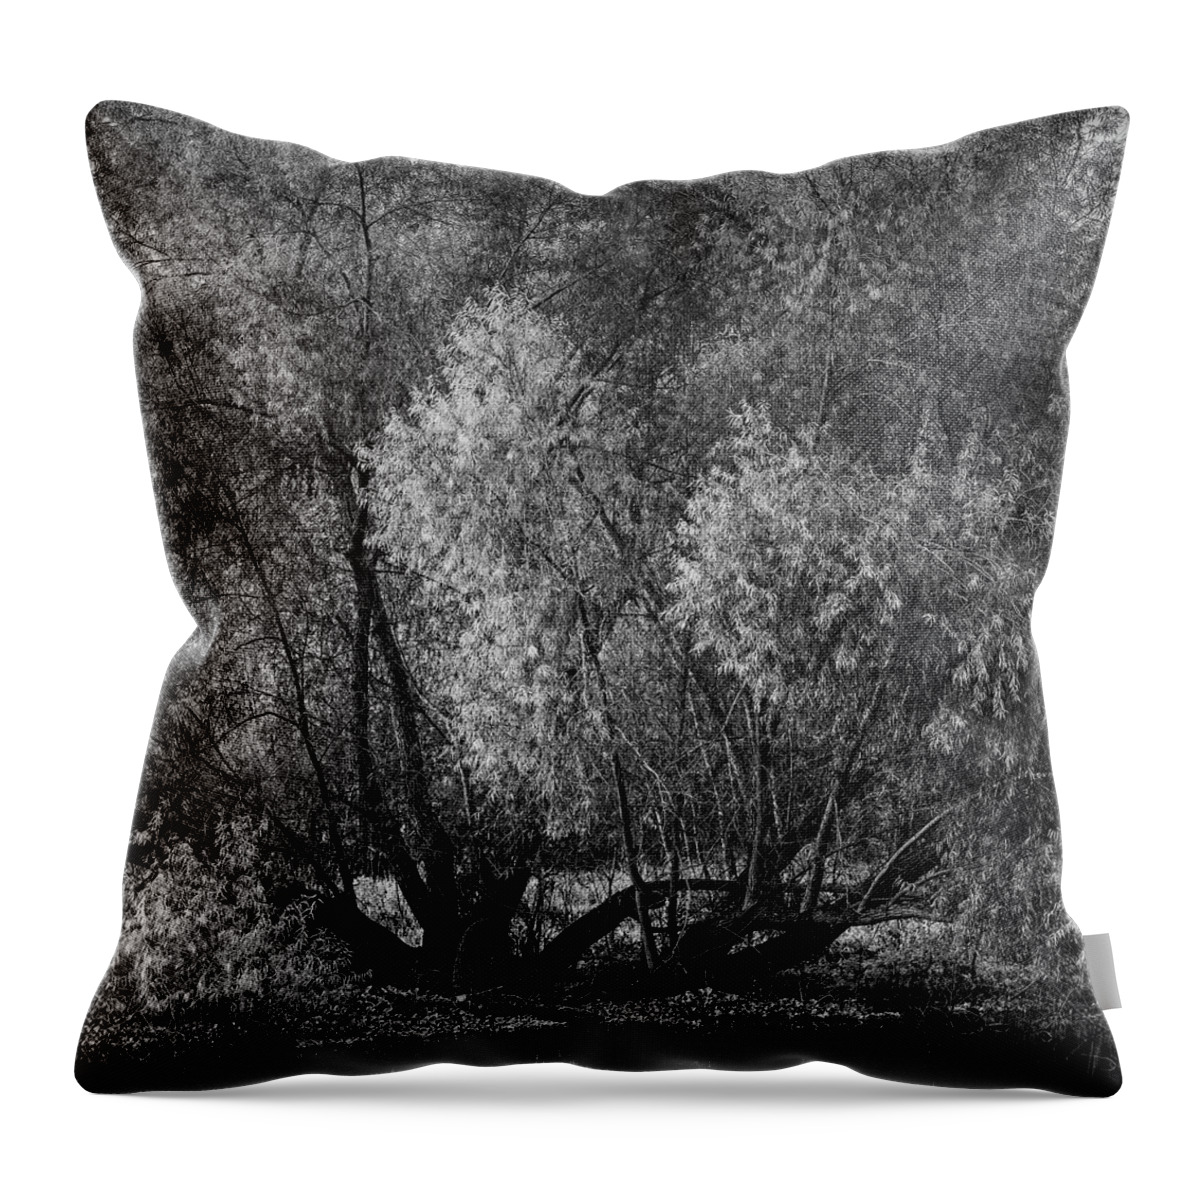 B&w Throw Pillow featuring the photograph Tree At New Horseshoe Lake by Mike Schaffner